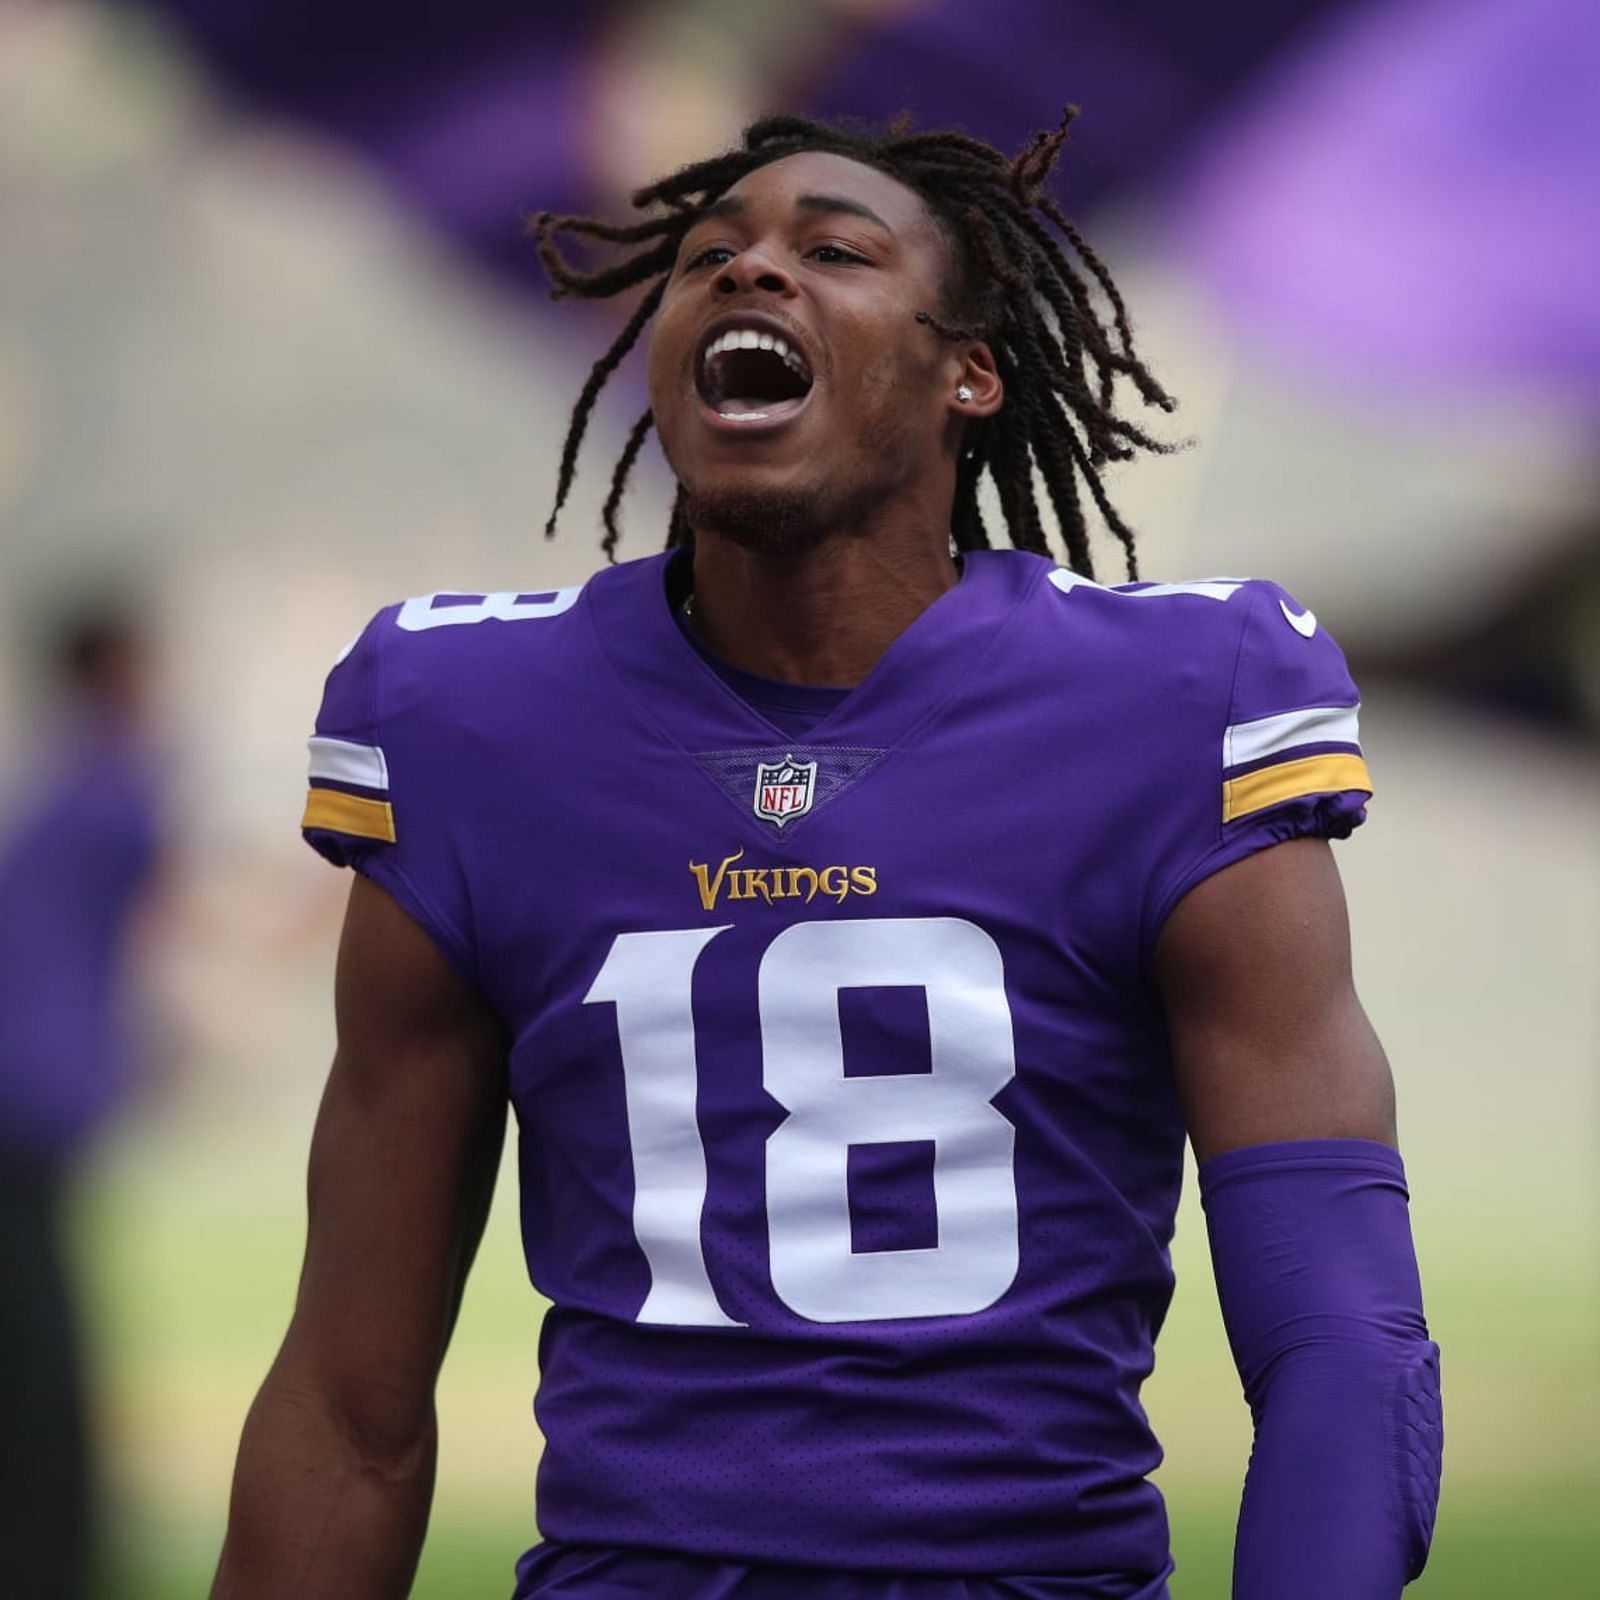 Minnesota Vikings schedule 2023 Dates, Time, TV Channel, Opponents and